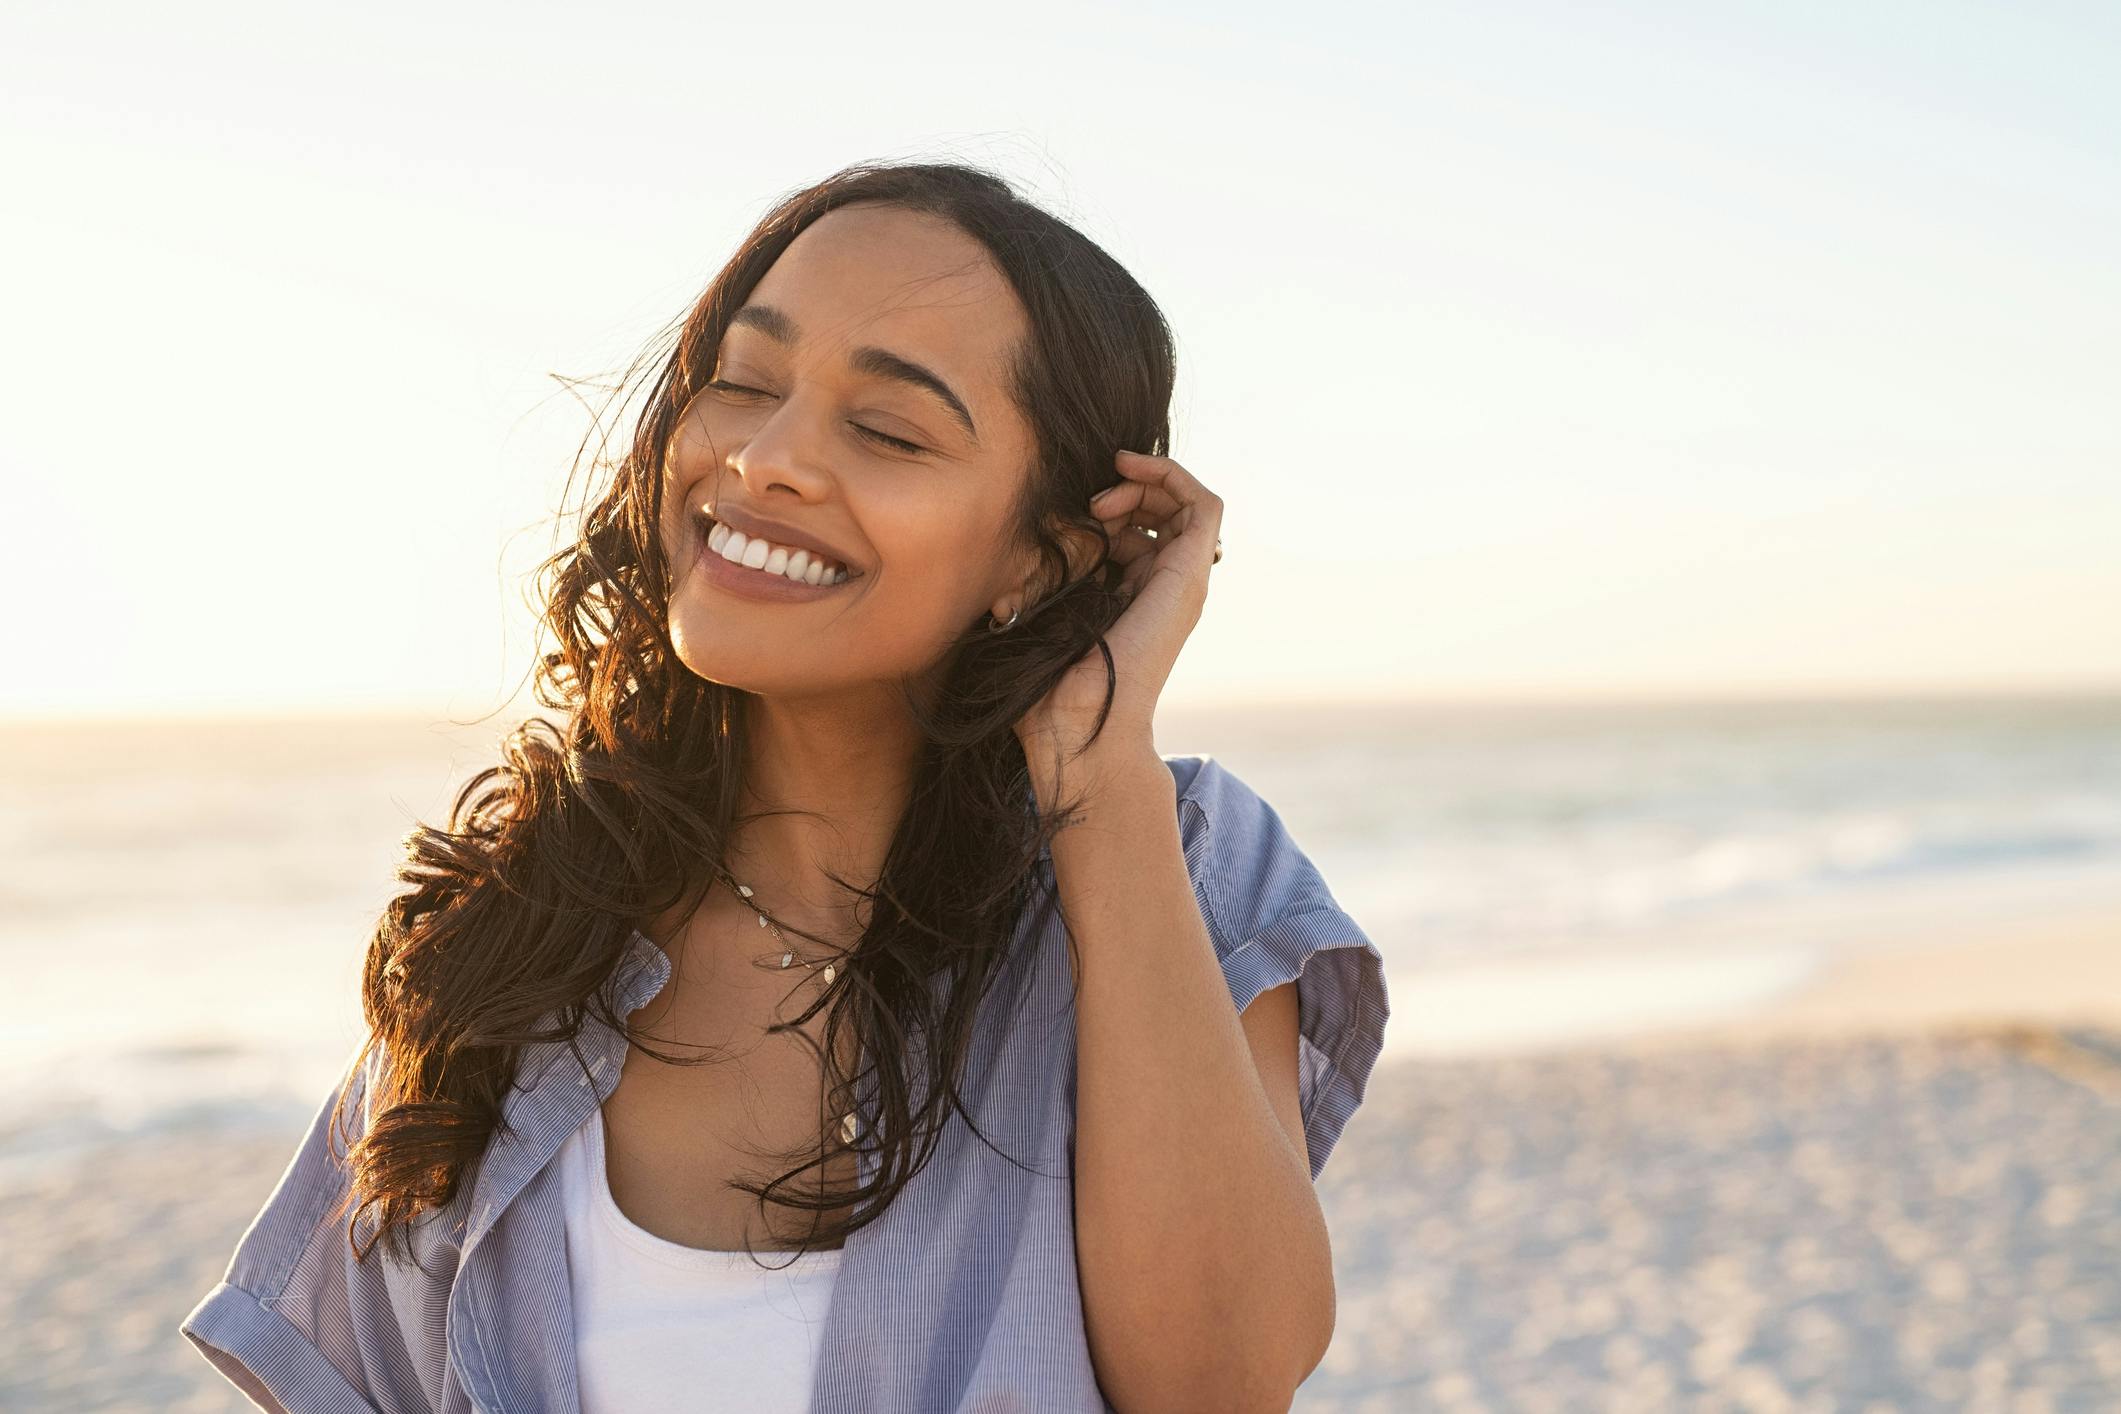 Woman smiling on the beach